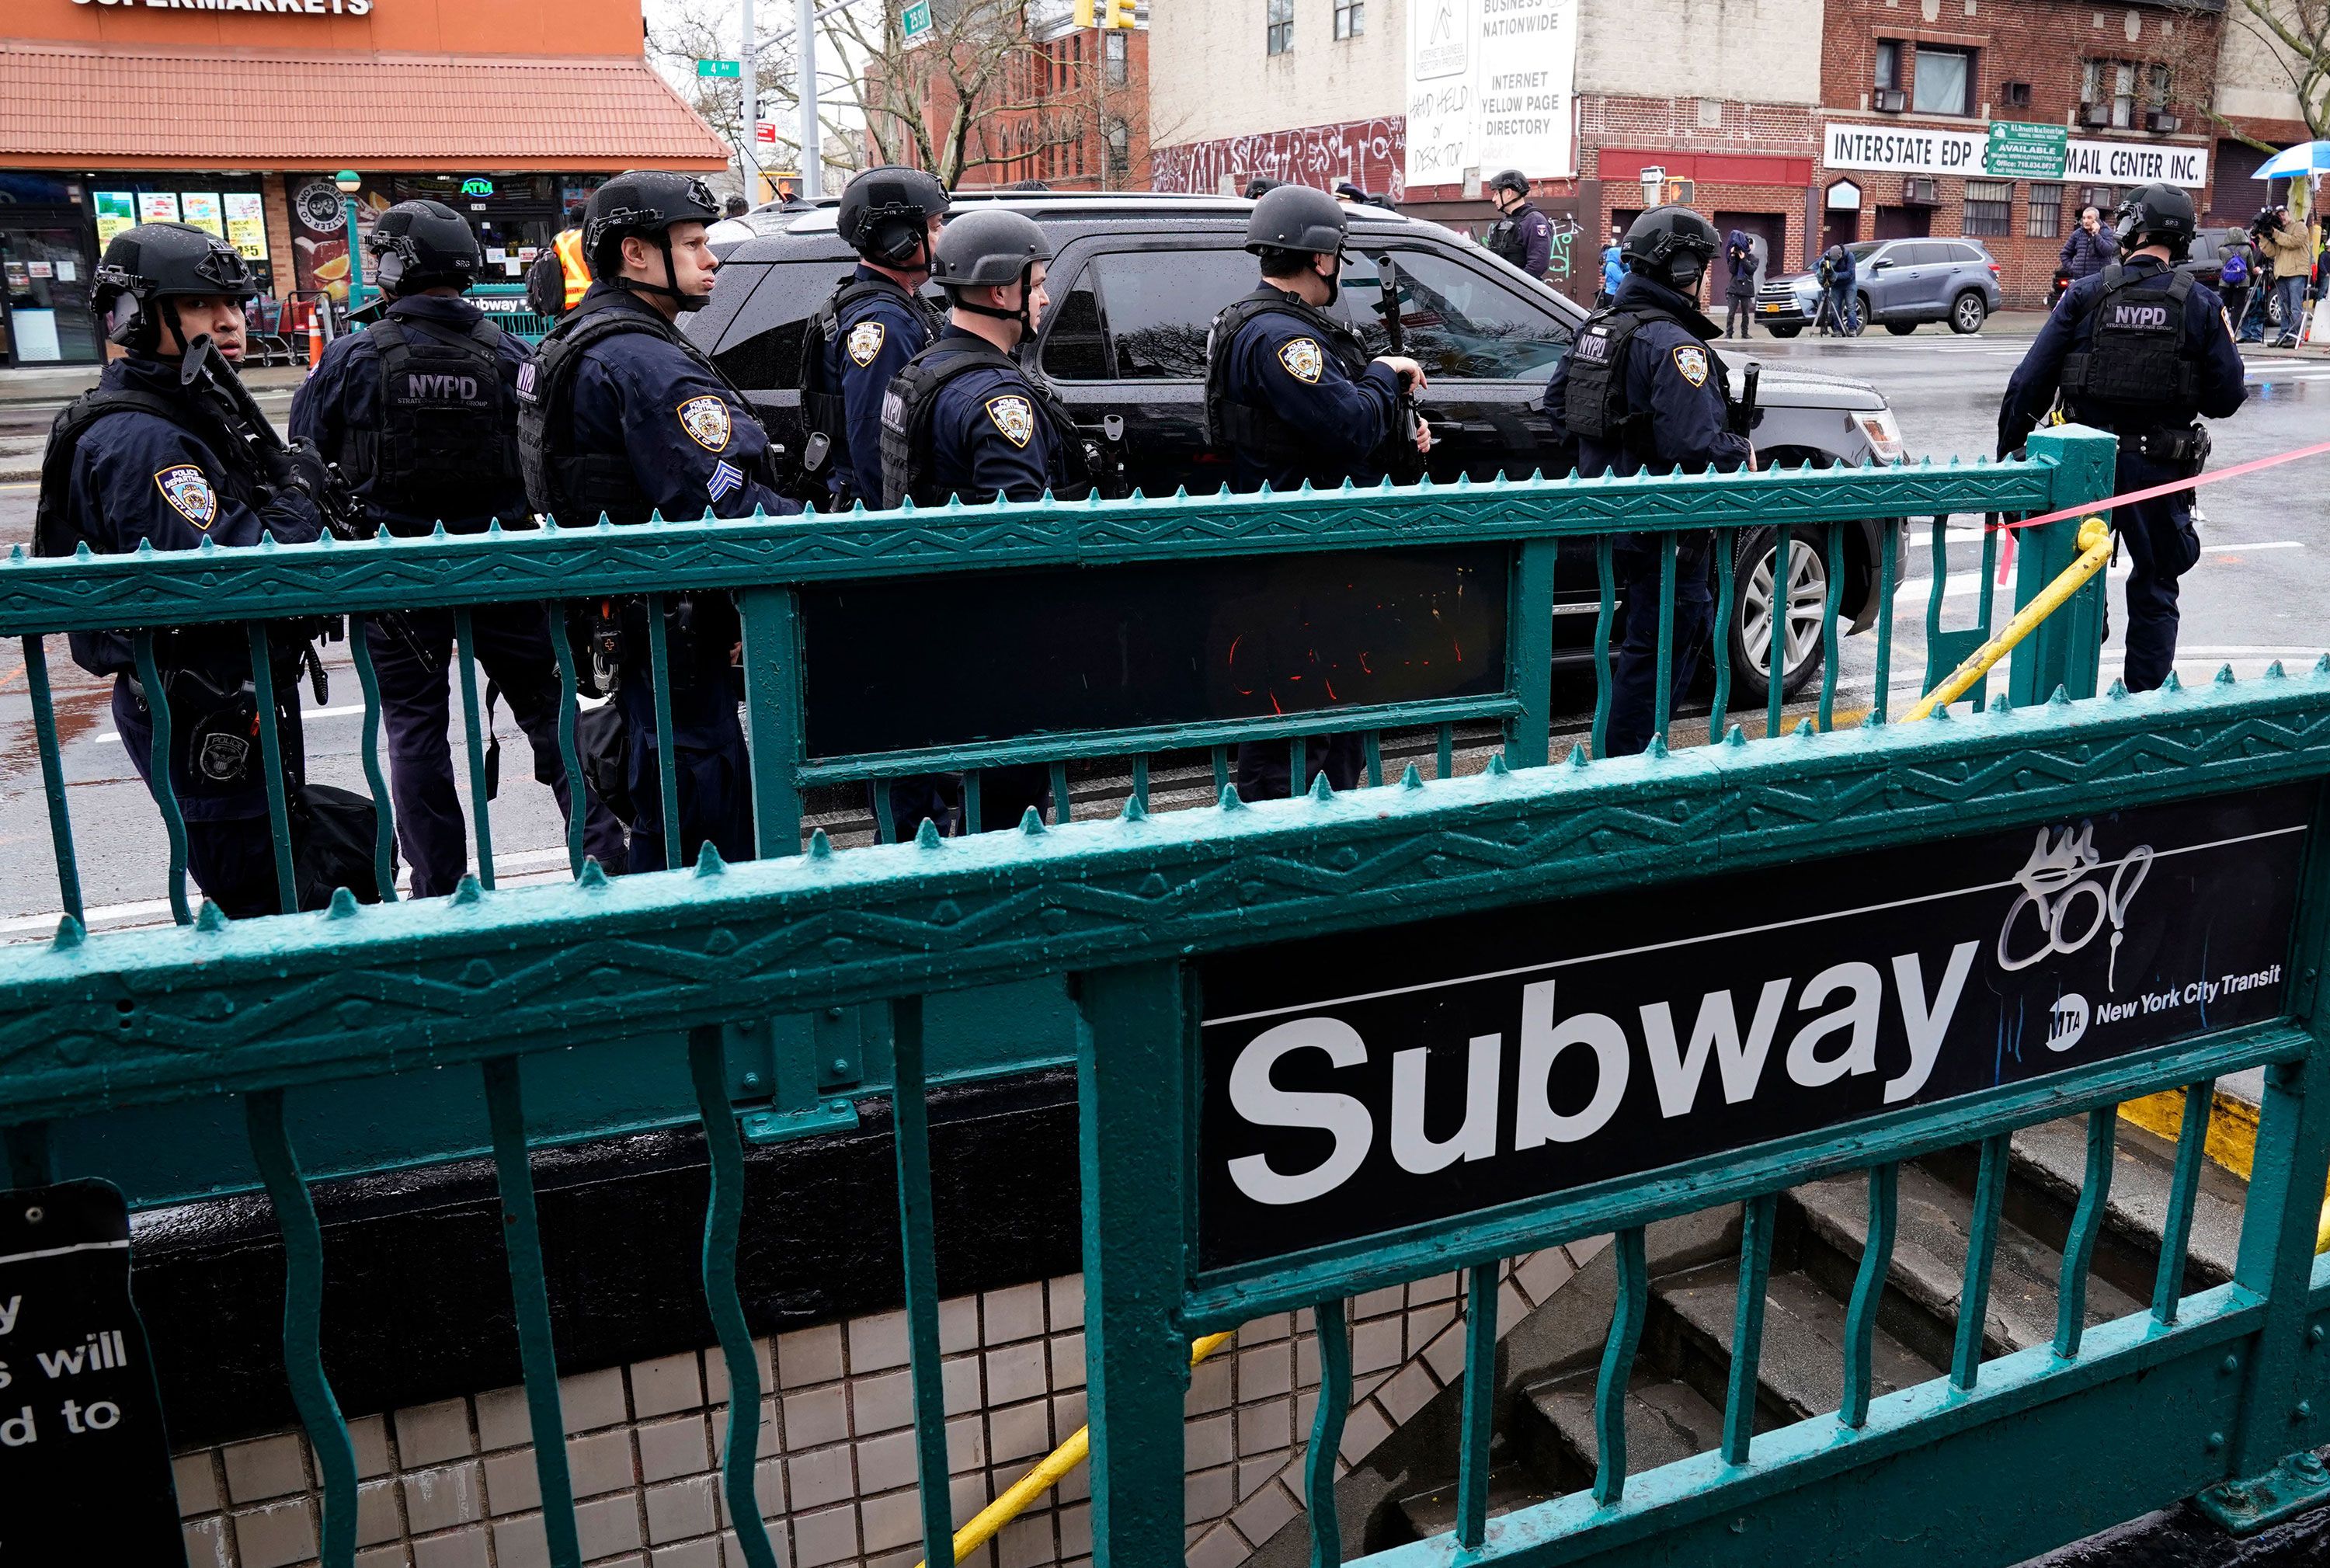 Vigilante Thwarts Subway Robbery in Times Square Heroics